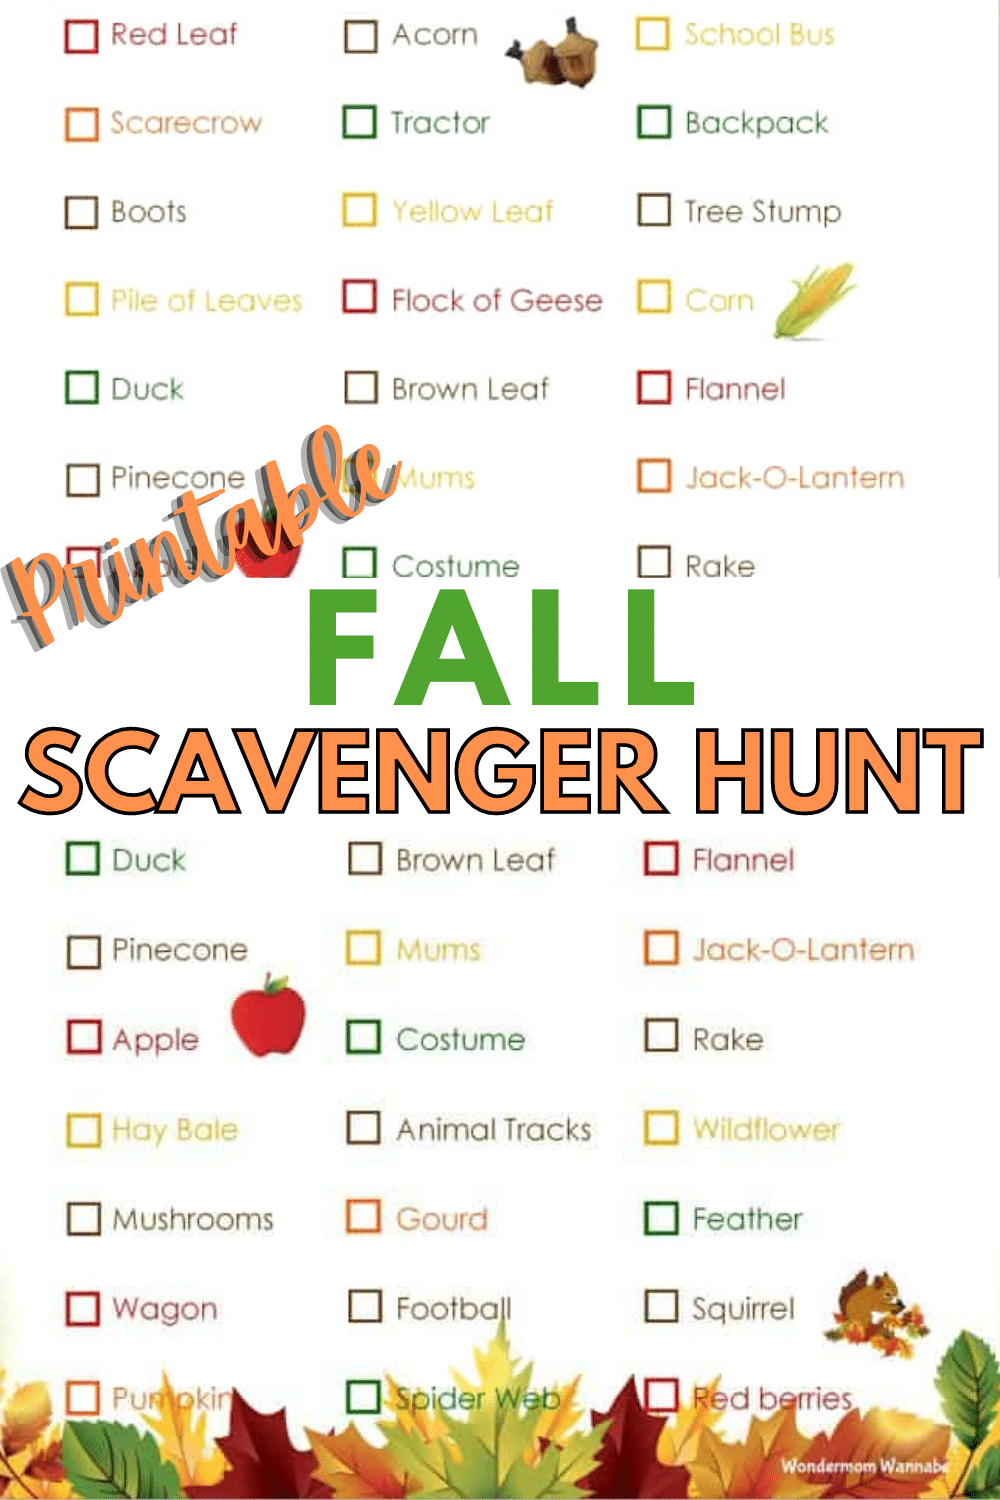 This printable fall scavenger hunt is fa fun and easy way to encourage kids to get outside and explore. #fall #scavengerhunt #kidsactivities #outdooractivities via @wondermomwannab